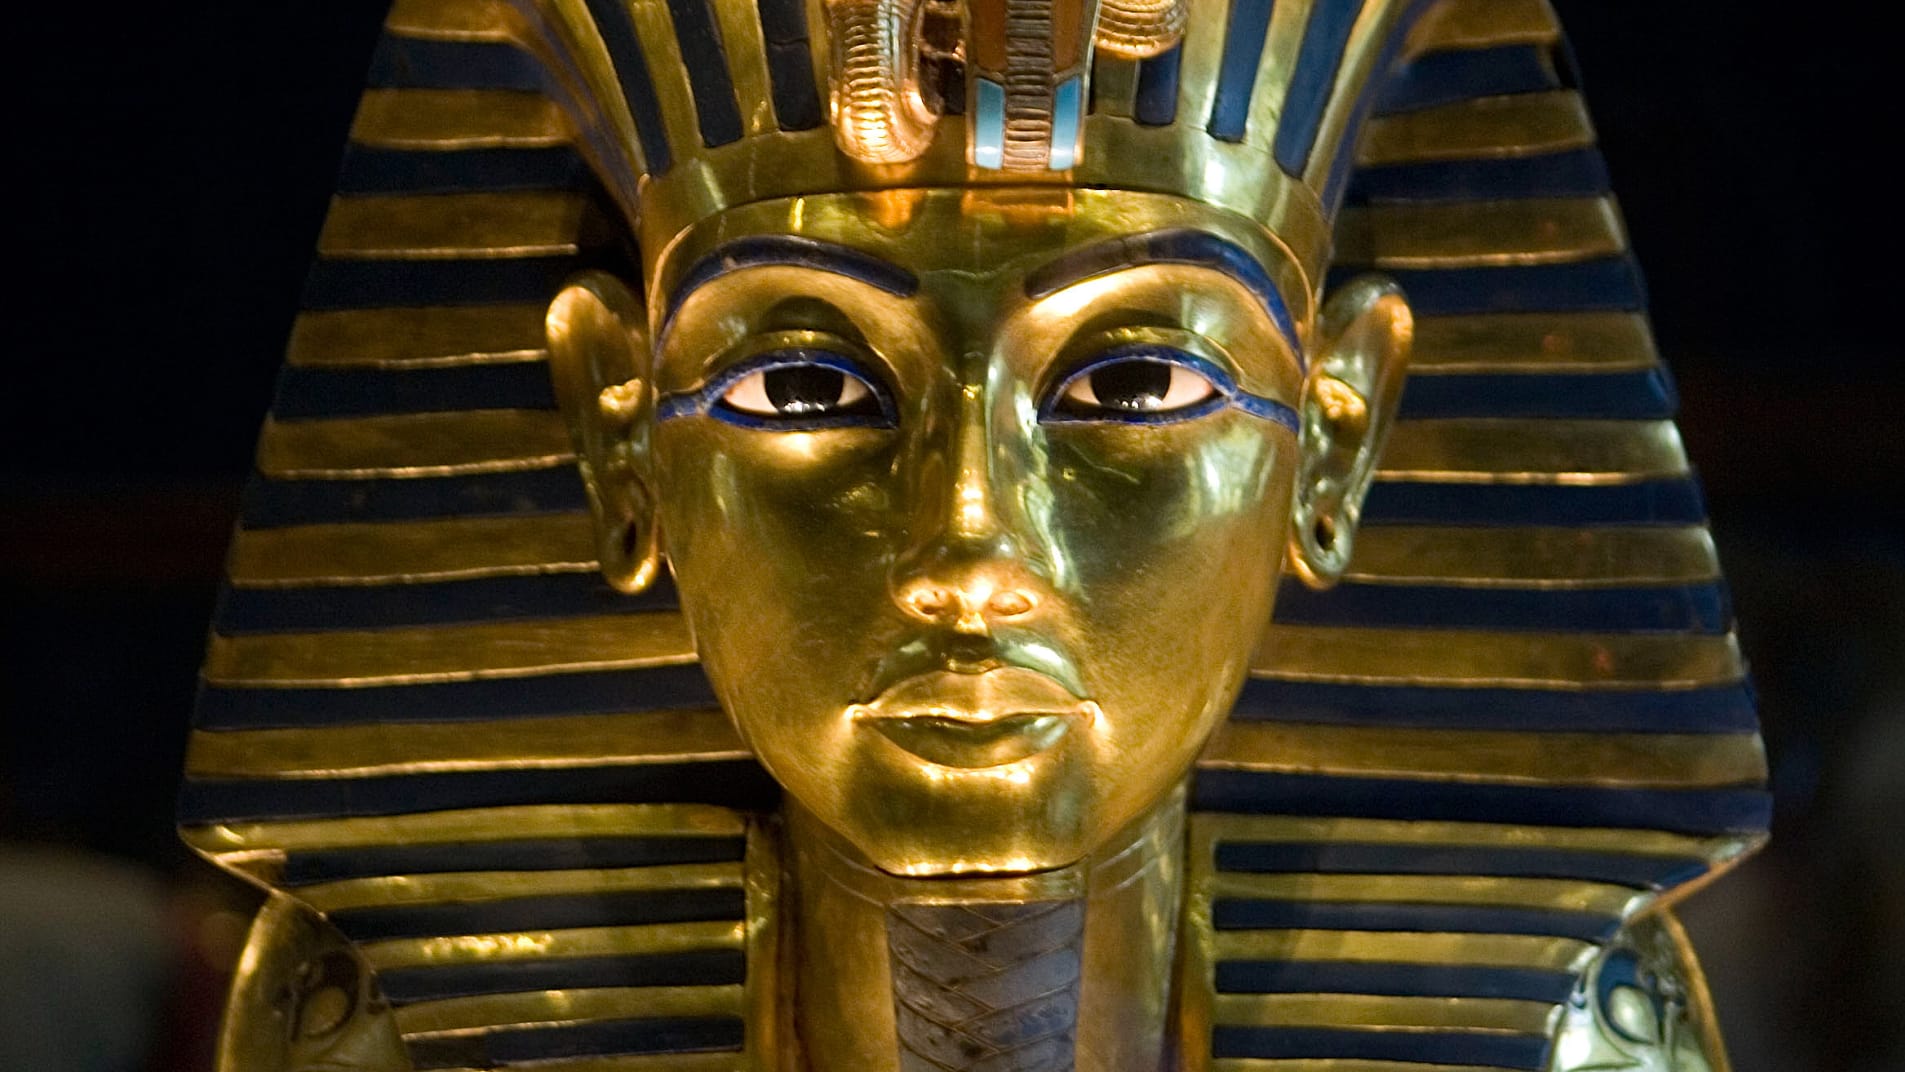 (FILES) -- A picture taken on October 20, 2009 shows King          Tutankhamun's golden mask displayed at the Egyptian museum in          Cairo. DNA testing has unraveled some of the mystery surrounding          the birth and death of pharaoh king Tutenkhamun, revealing his          father was a famed monotheistic king and ruling out Nefertiti as          his mother, Egypt's antiquities chief said on February 17, 2010.          AFP PHOTO/KHALED DESOUKI (Photo credit should read KHALED          DESOUKI/AFP/Getty Images)